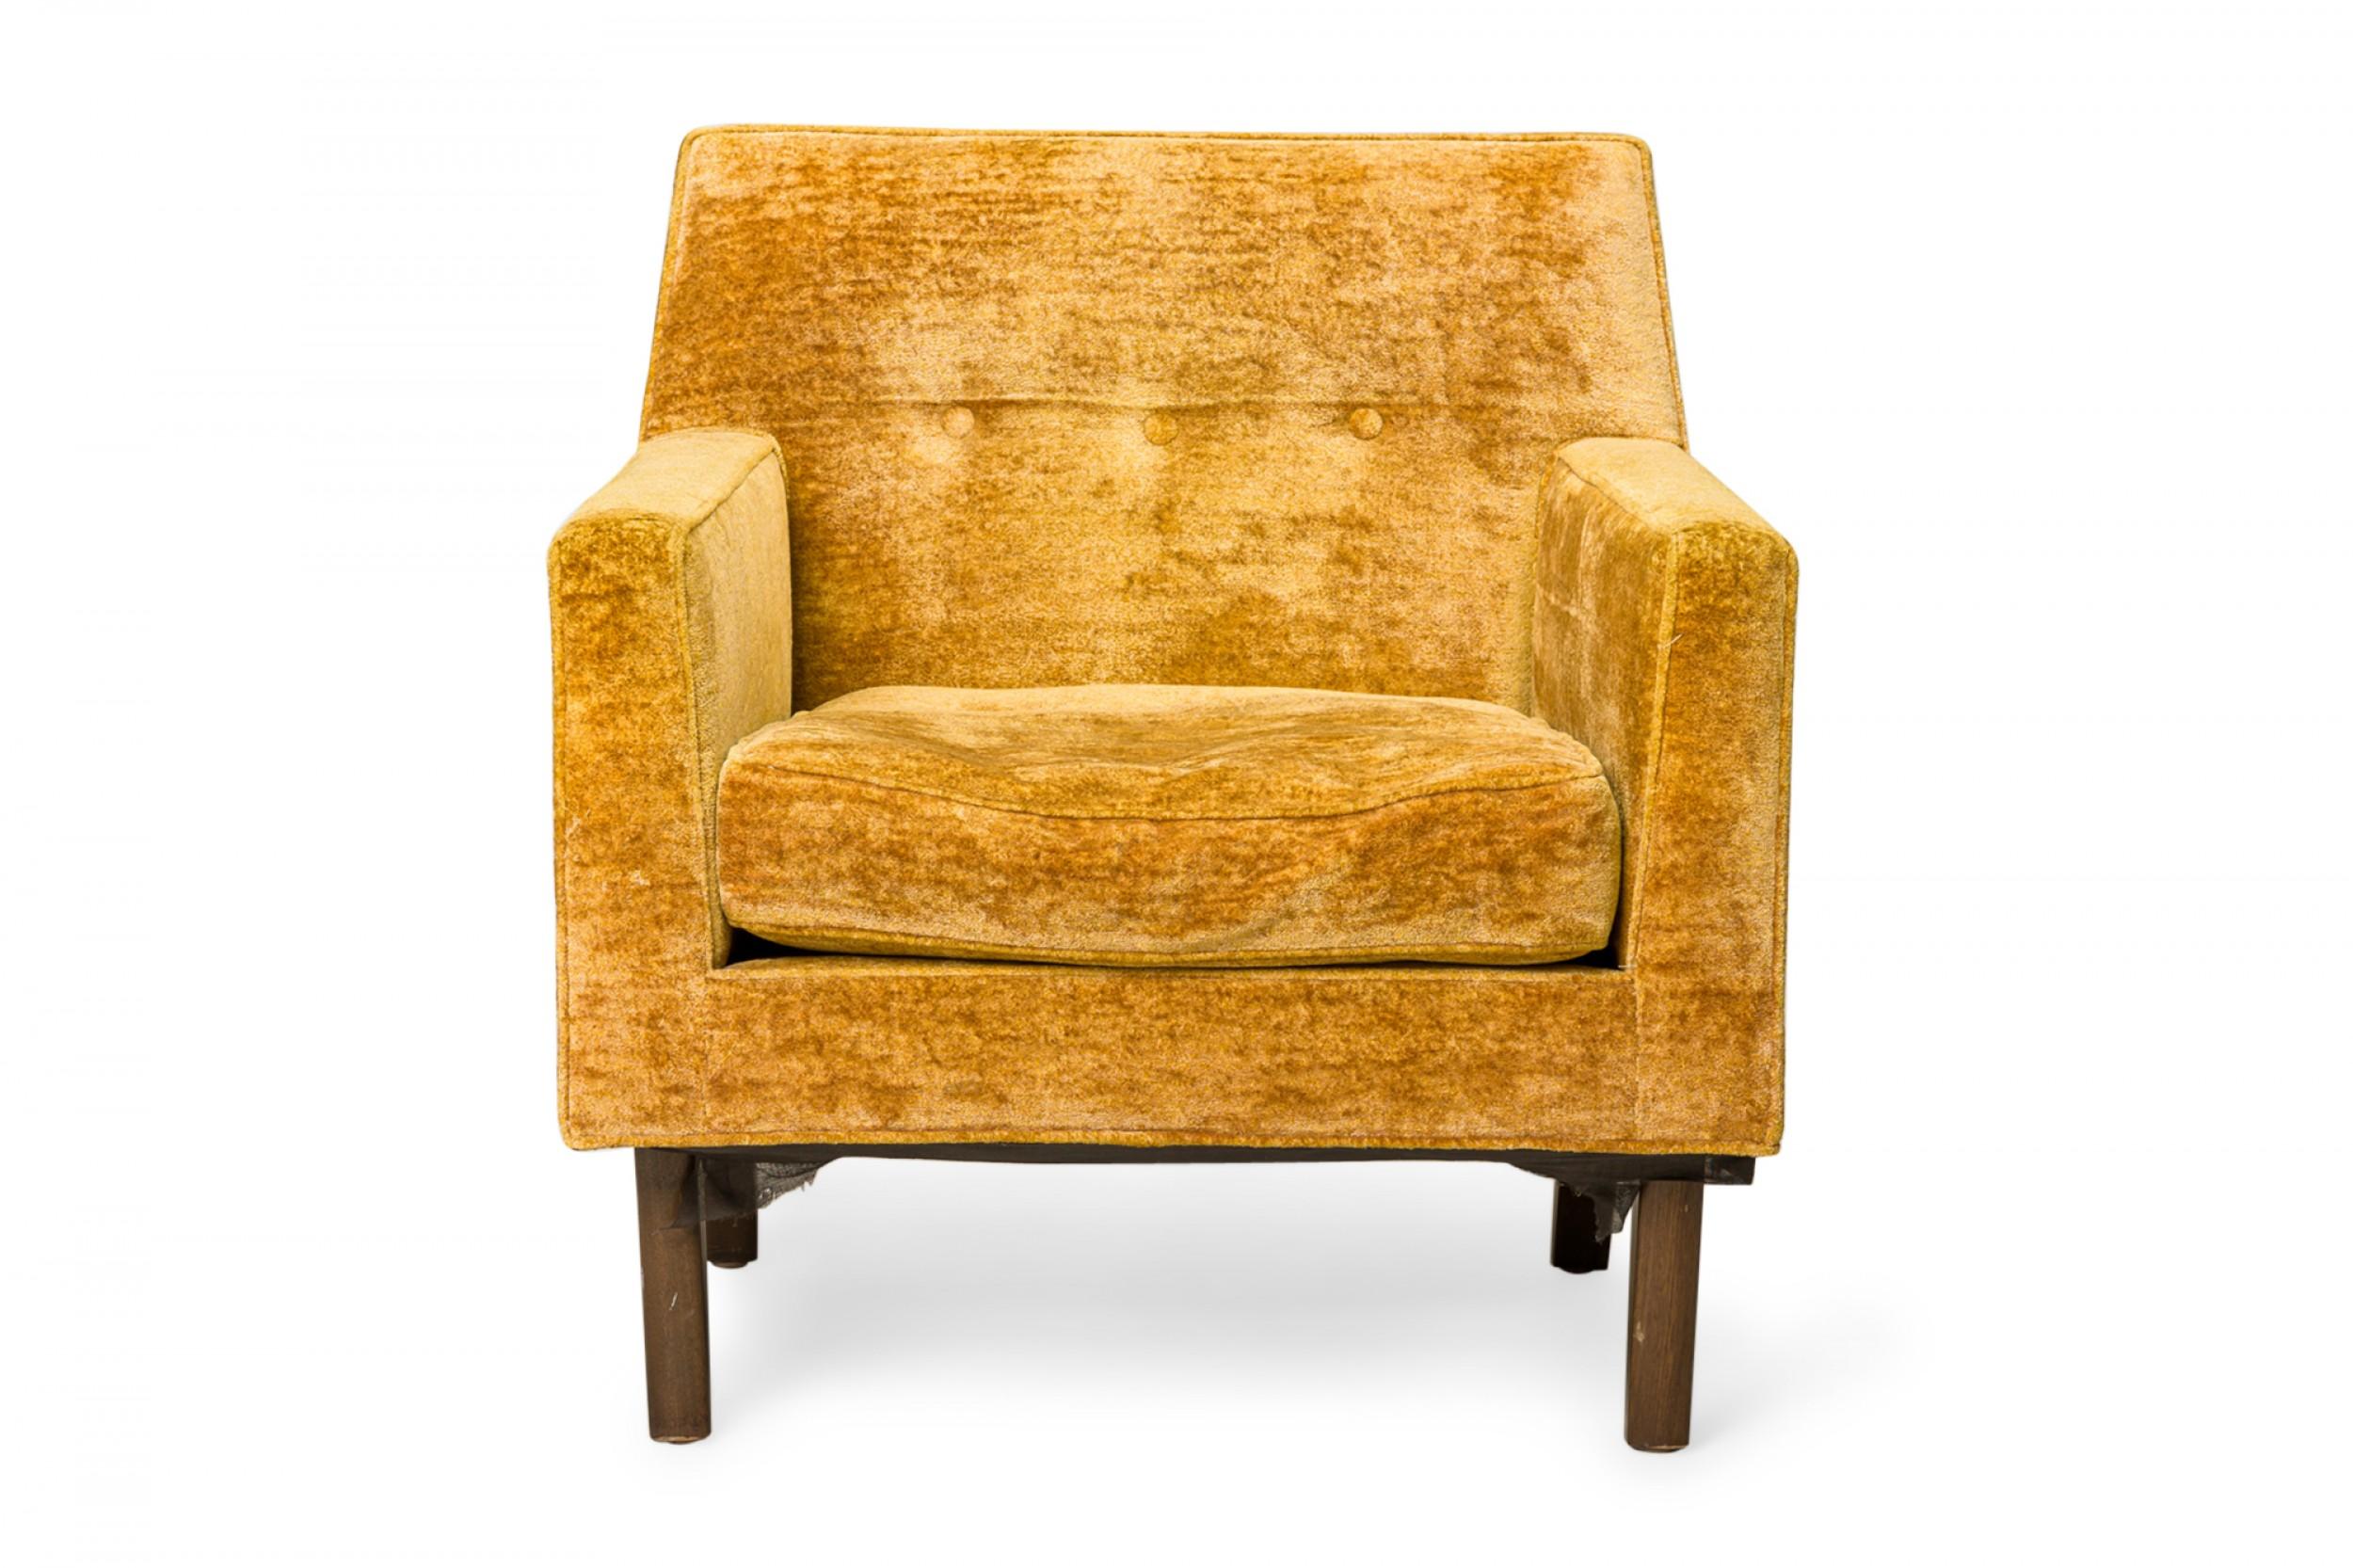 American mid-century lounge armchair with square arms and a slightly tapered short back, with crushed gold velour upholstery with button tufted detail on the back cushion, resting on four tapered walnut legs. (EDWARD J WORMLEY FOR DUNBAR FURNITURE